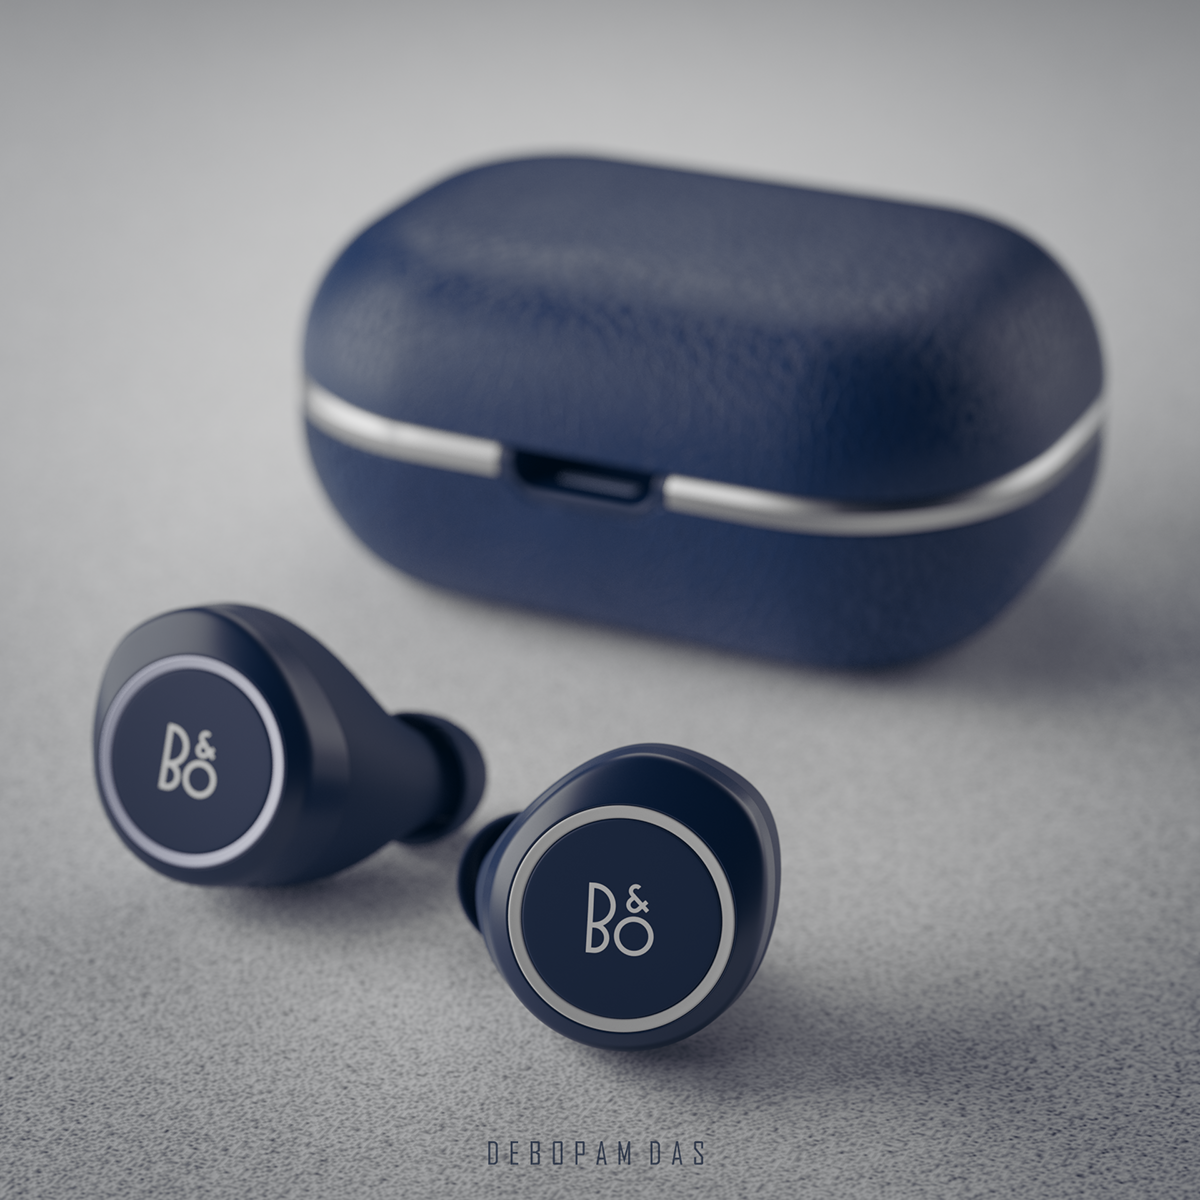 3D 3d modeling blender Renderweekly Earbuds Bang & Olufsen music product product design 